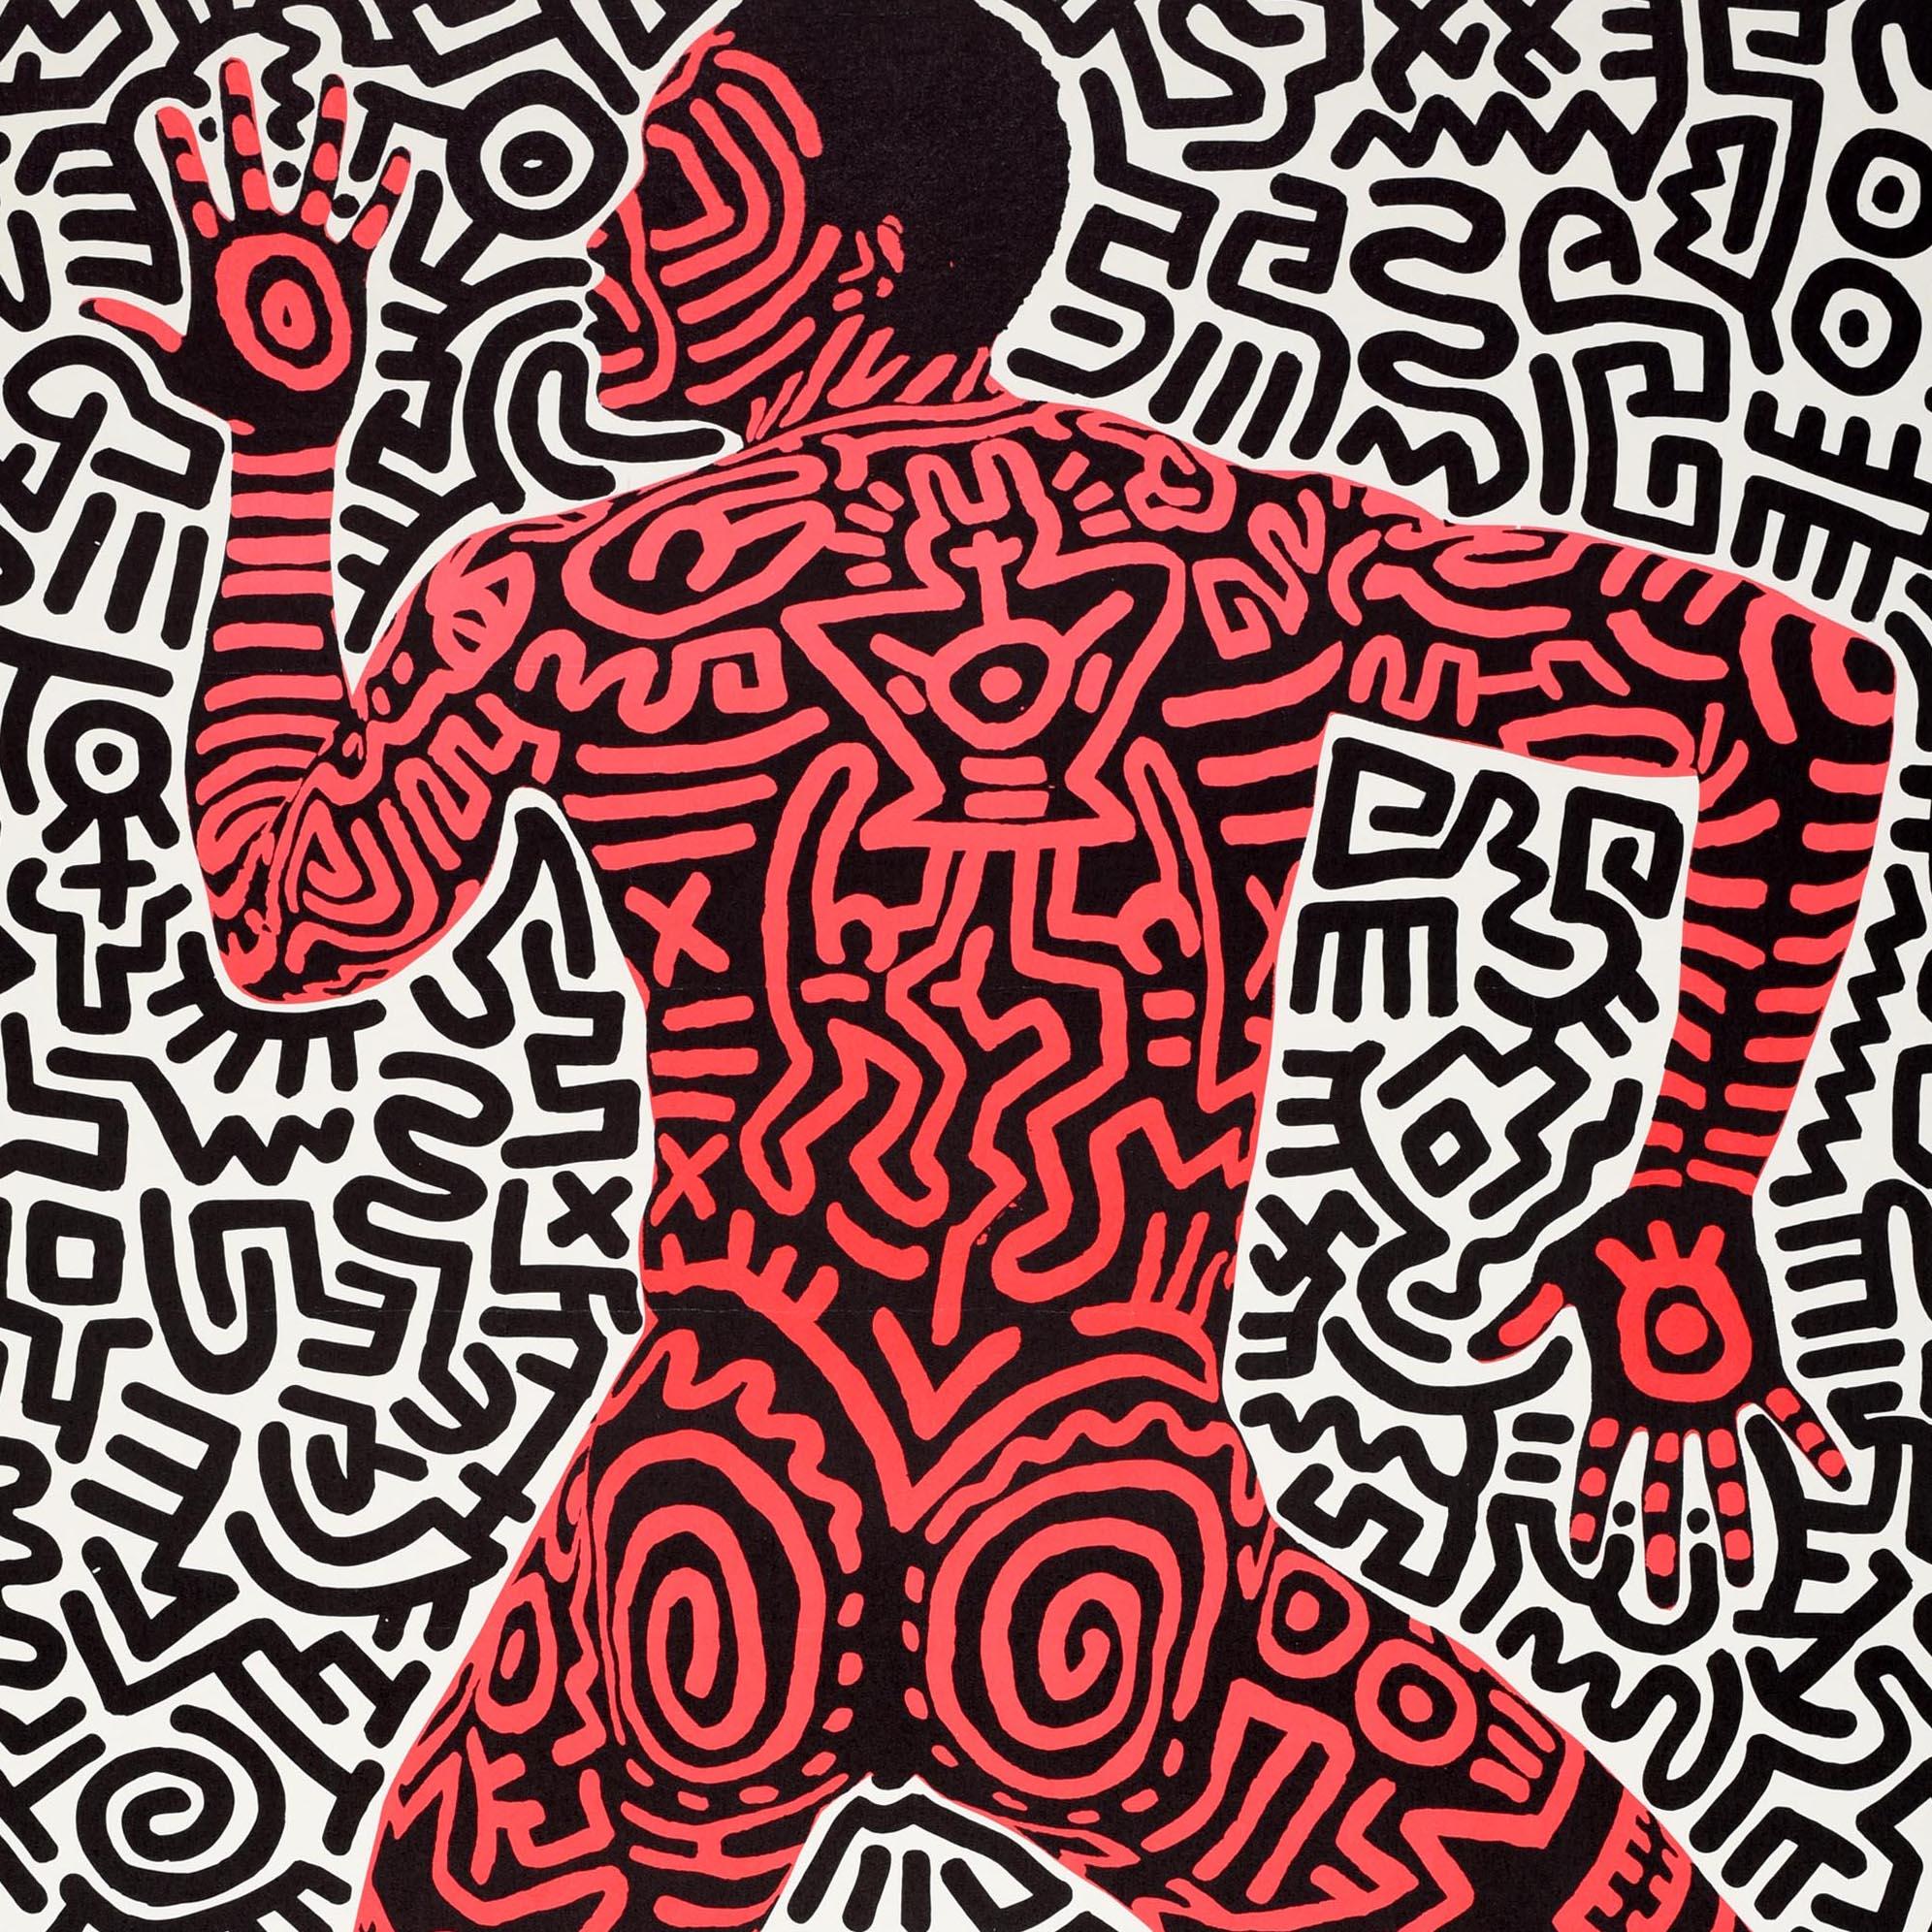 Original vintage advertising poster for a Keith Haring exhibition - Into 84 - held at the Tony Shafrazi Gallery in New York City from 3 December to 7 January. Great design by the American artist and social activist Keith Haring (1958-1990) featuring